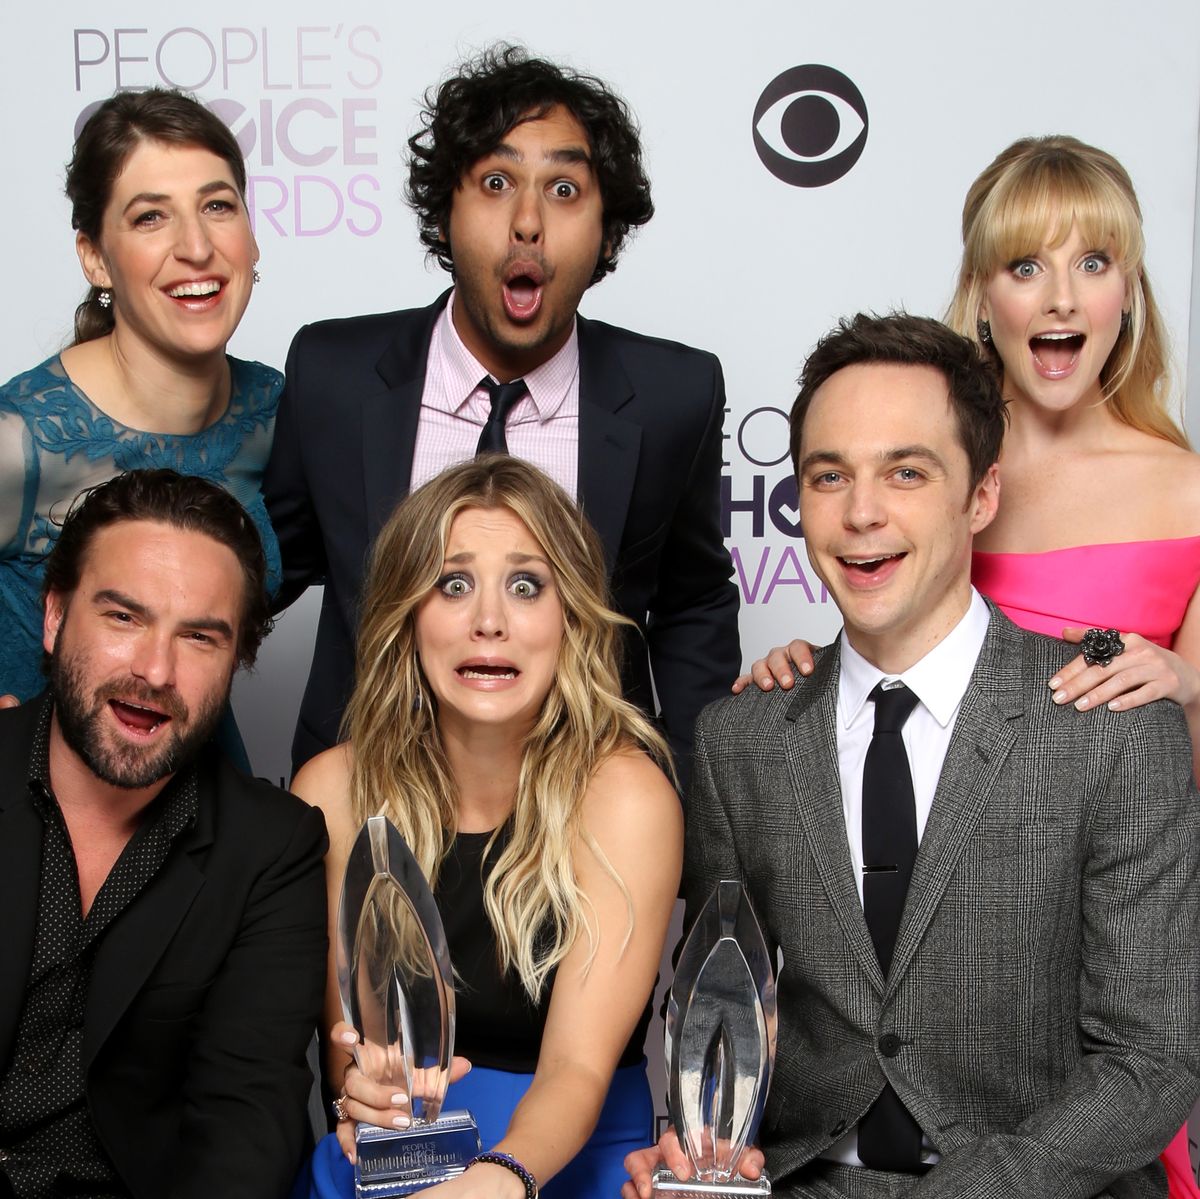 Installere edderkop skræmmende What the 'Big Bang Theory' Cast Has Been Up To Since The Finale